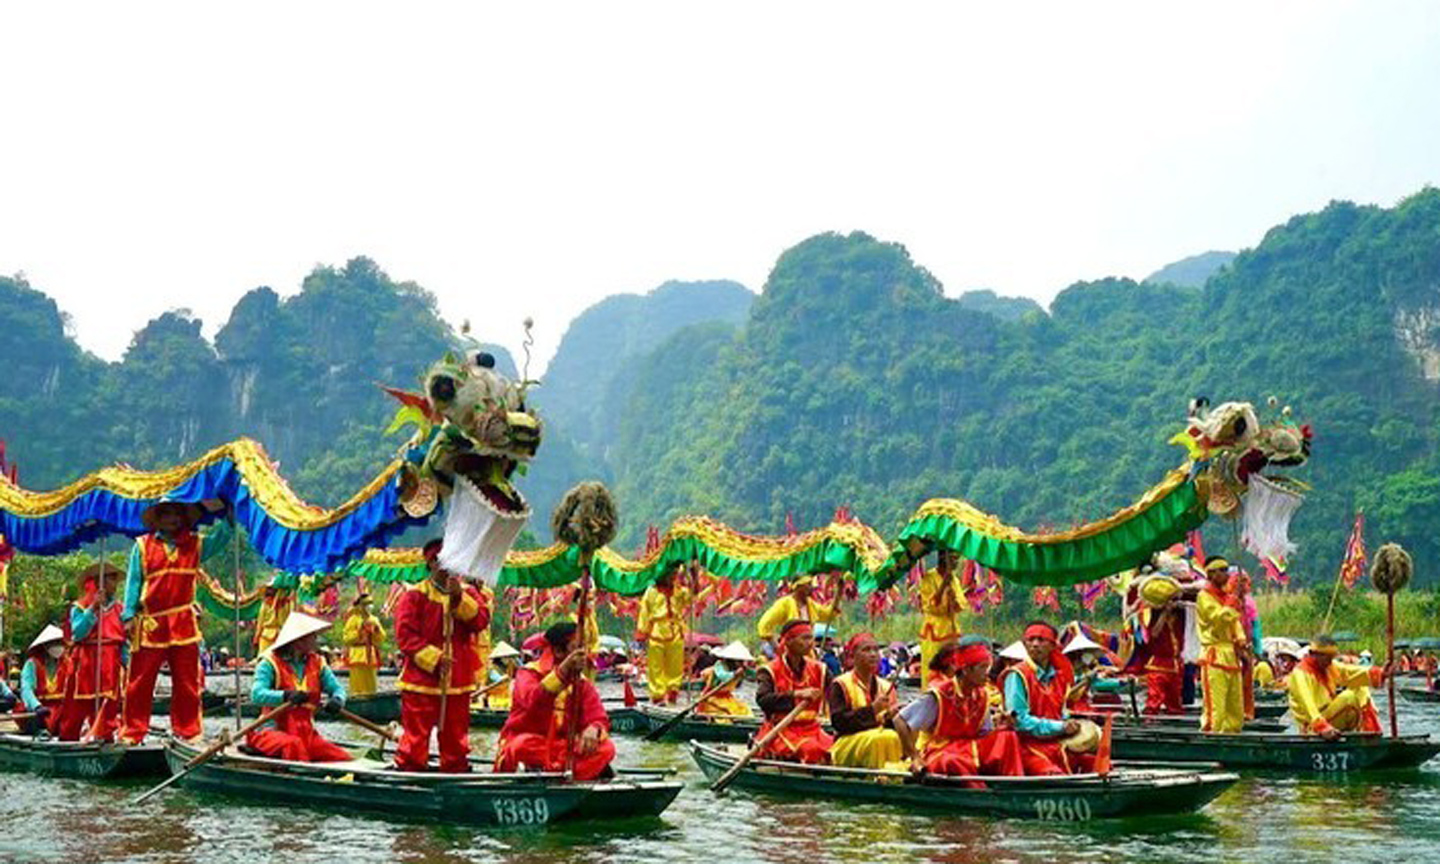 ABO/NDO- Trang An Festival 2023 was launched at Trang An cultural and natural heritage complex in Ninh Binh Province on May 7, attracting thousands of locals and visitors.